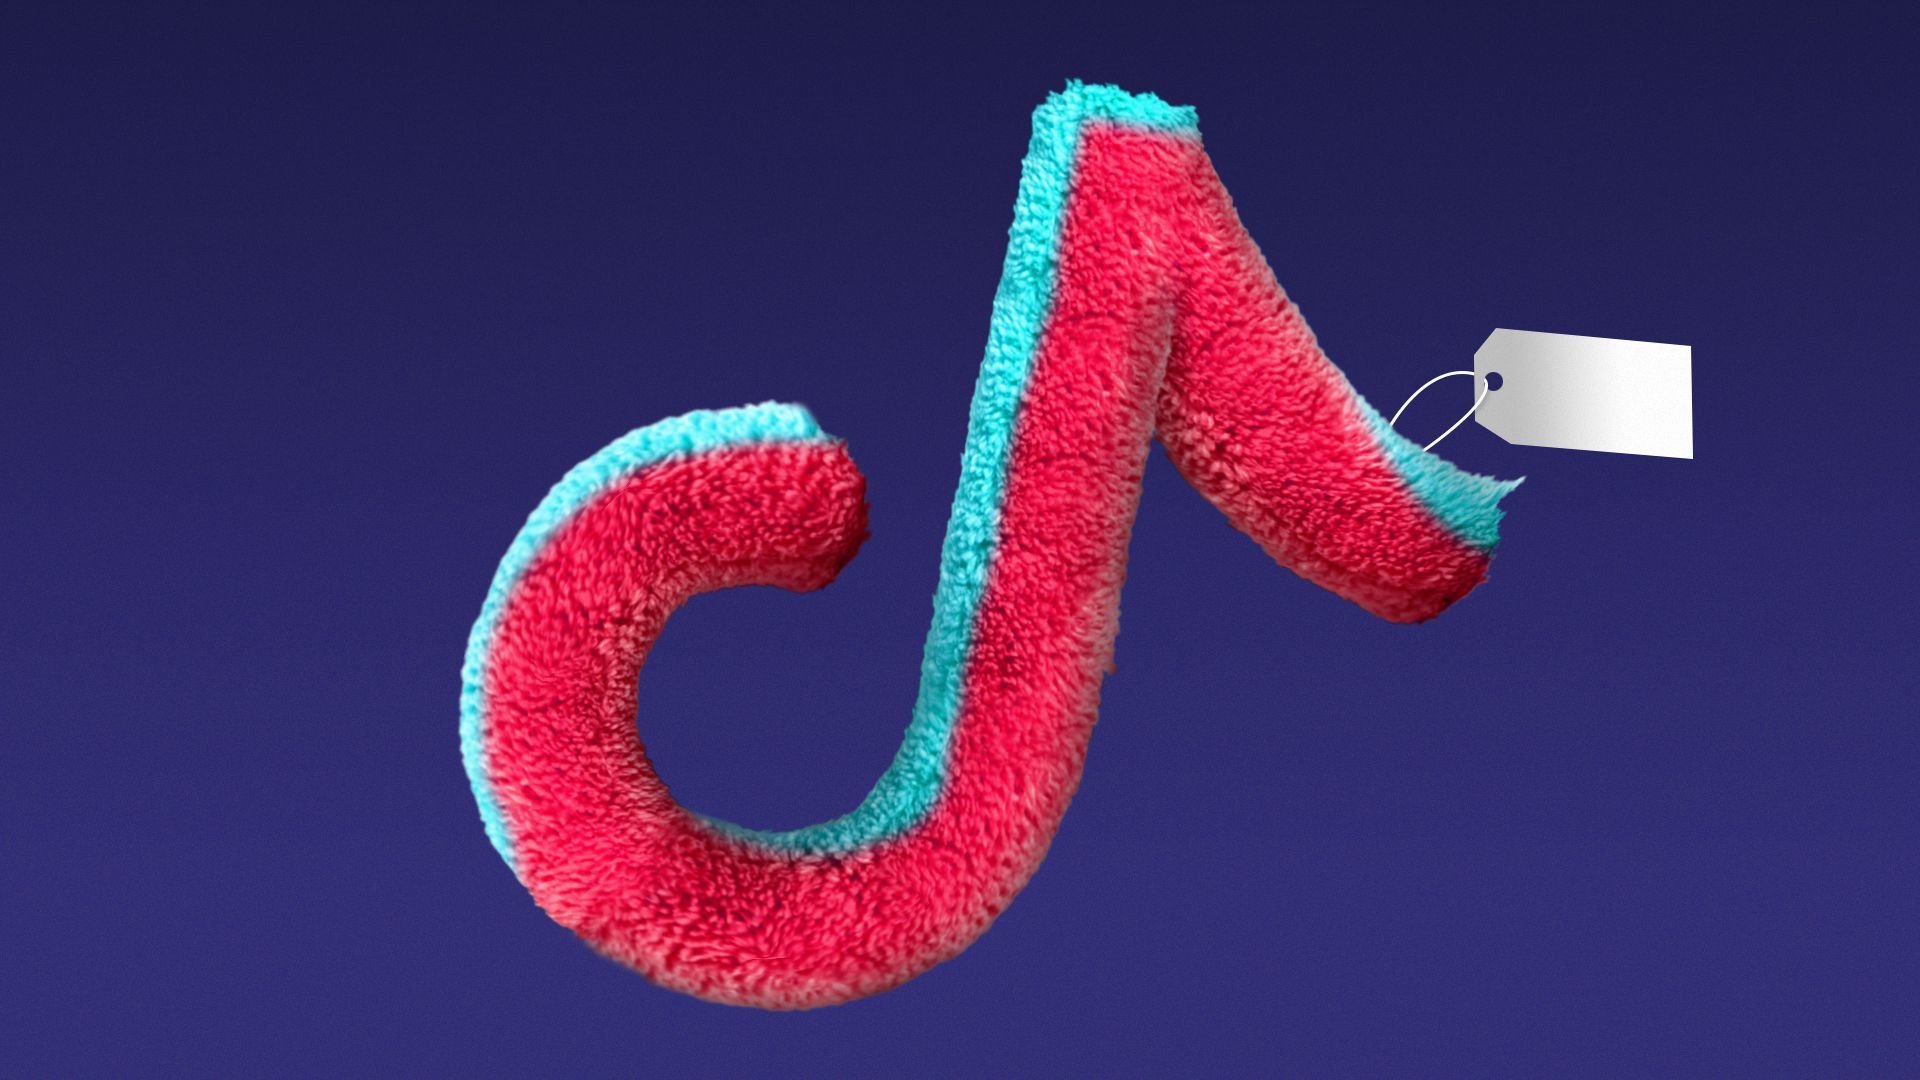 Illustration of a stuffed animal plush toy in the shape of the Tiktok logo 